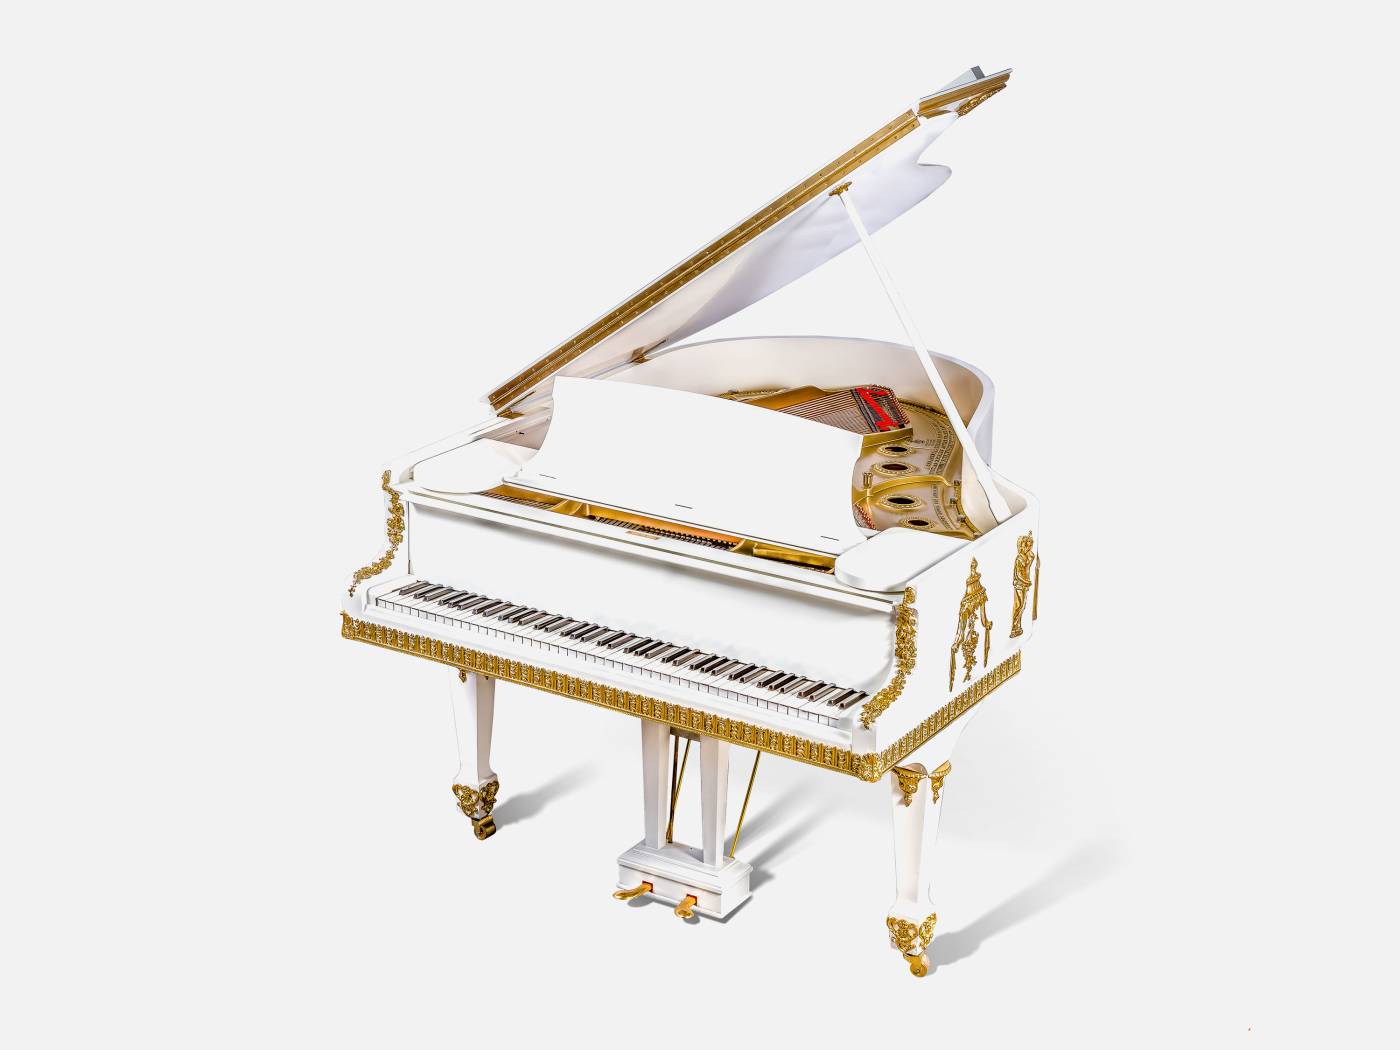 ART. 1095 – C.G. Capelletti Italian Luxury Classic Pianos. Transform your space with sophisticated made in italy classic interior design.